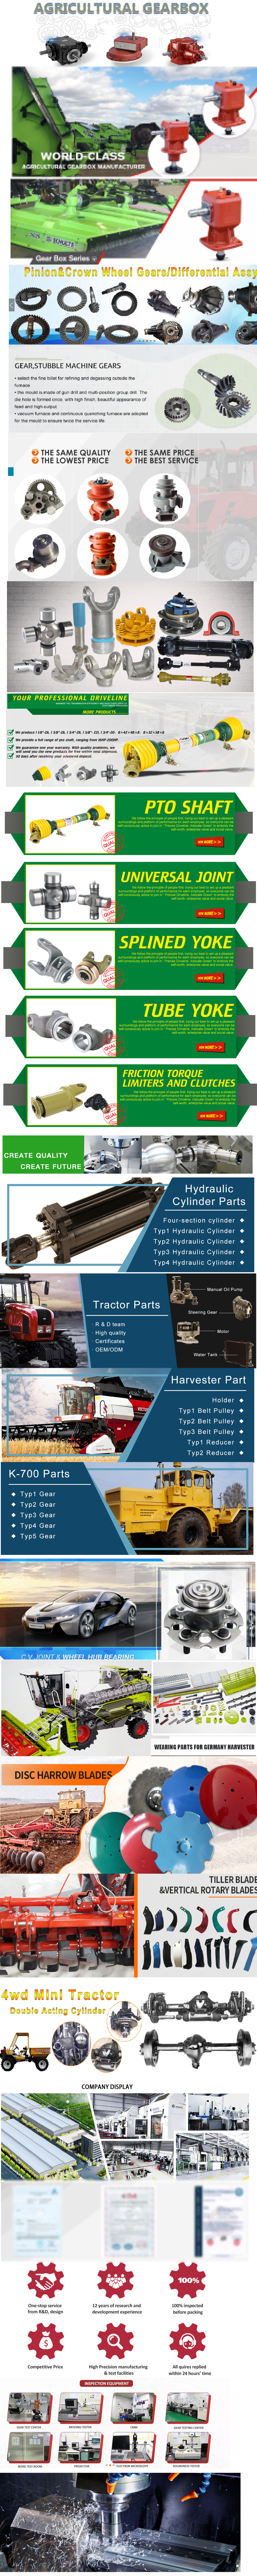 Best  made in China - replacement parts - agricultural gearbox manufacturer in China Agricultural  agricultural gearbox parts Machinery Power Tiller Gearbox  Tractor Pto Rotary Tiller for Sale with ce certificate top quality low price suitable for Tractor, Agricultural machines, right angle pto shaft drive 